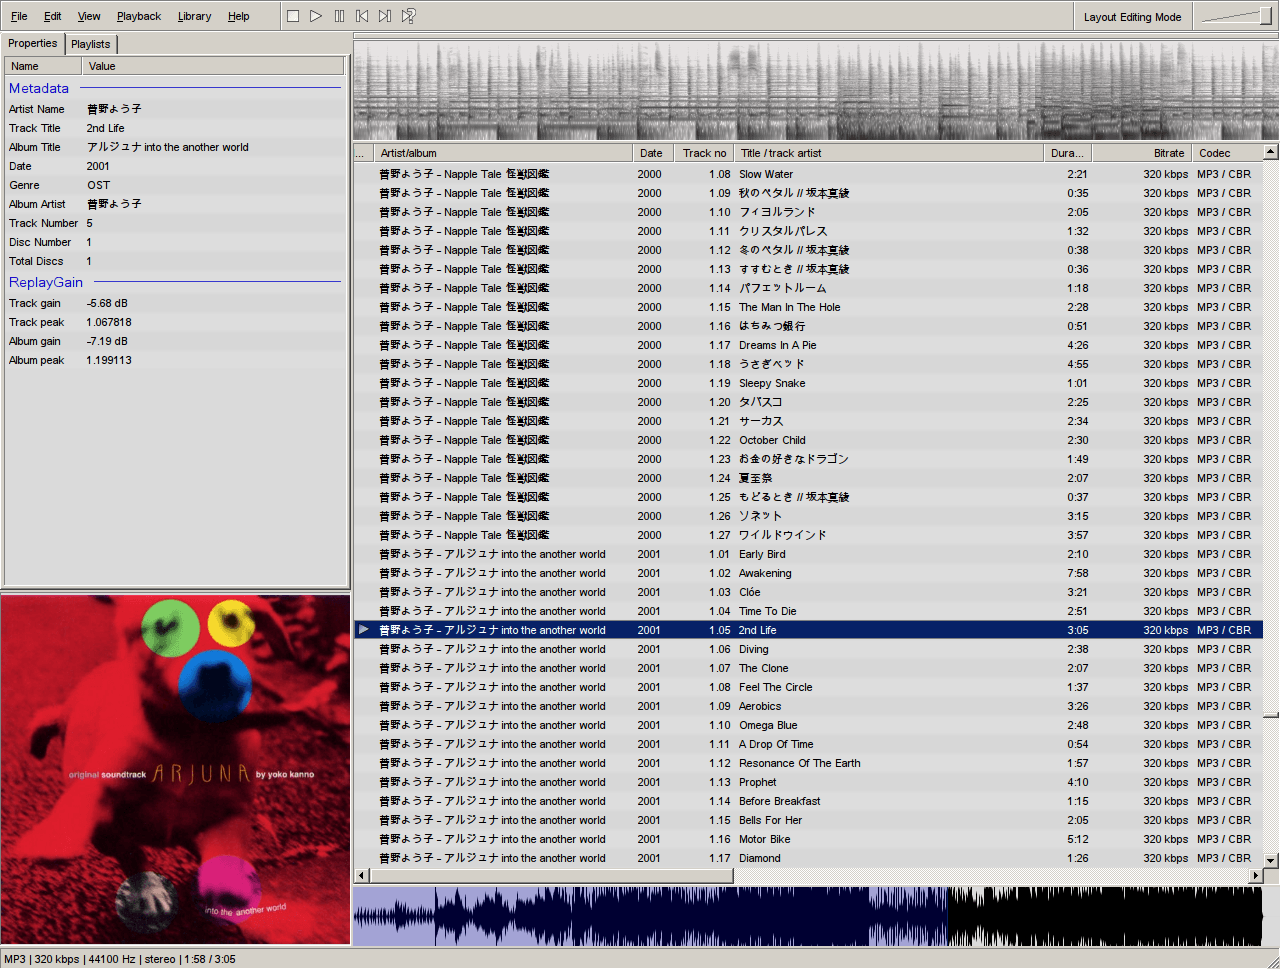 foobar2000 in wine-staging (lodpi)